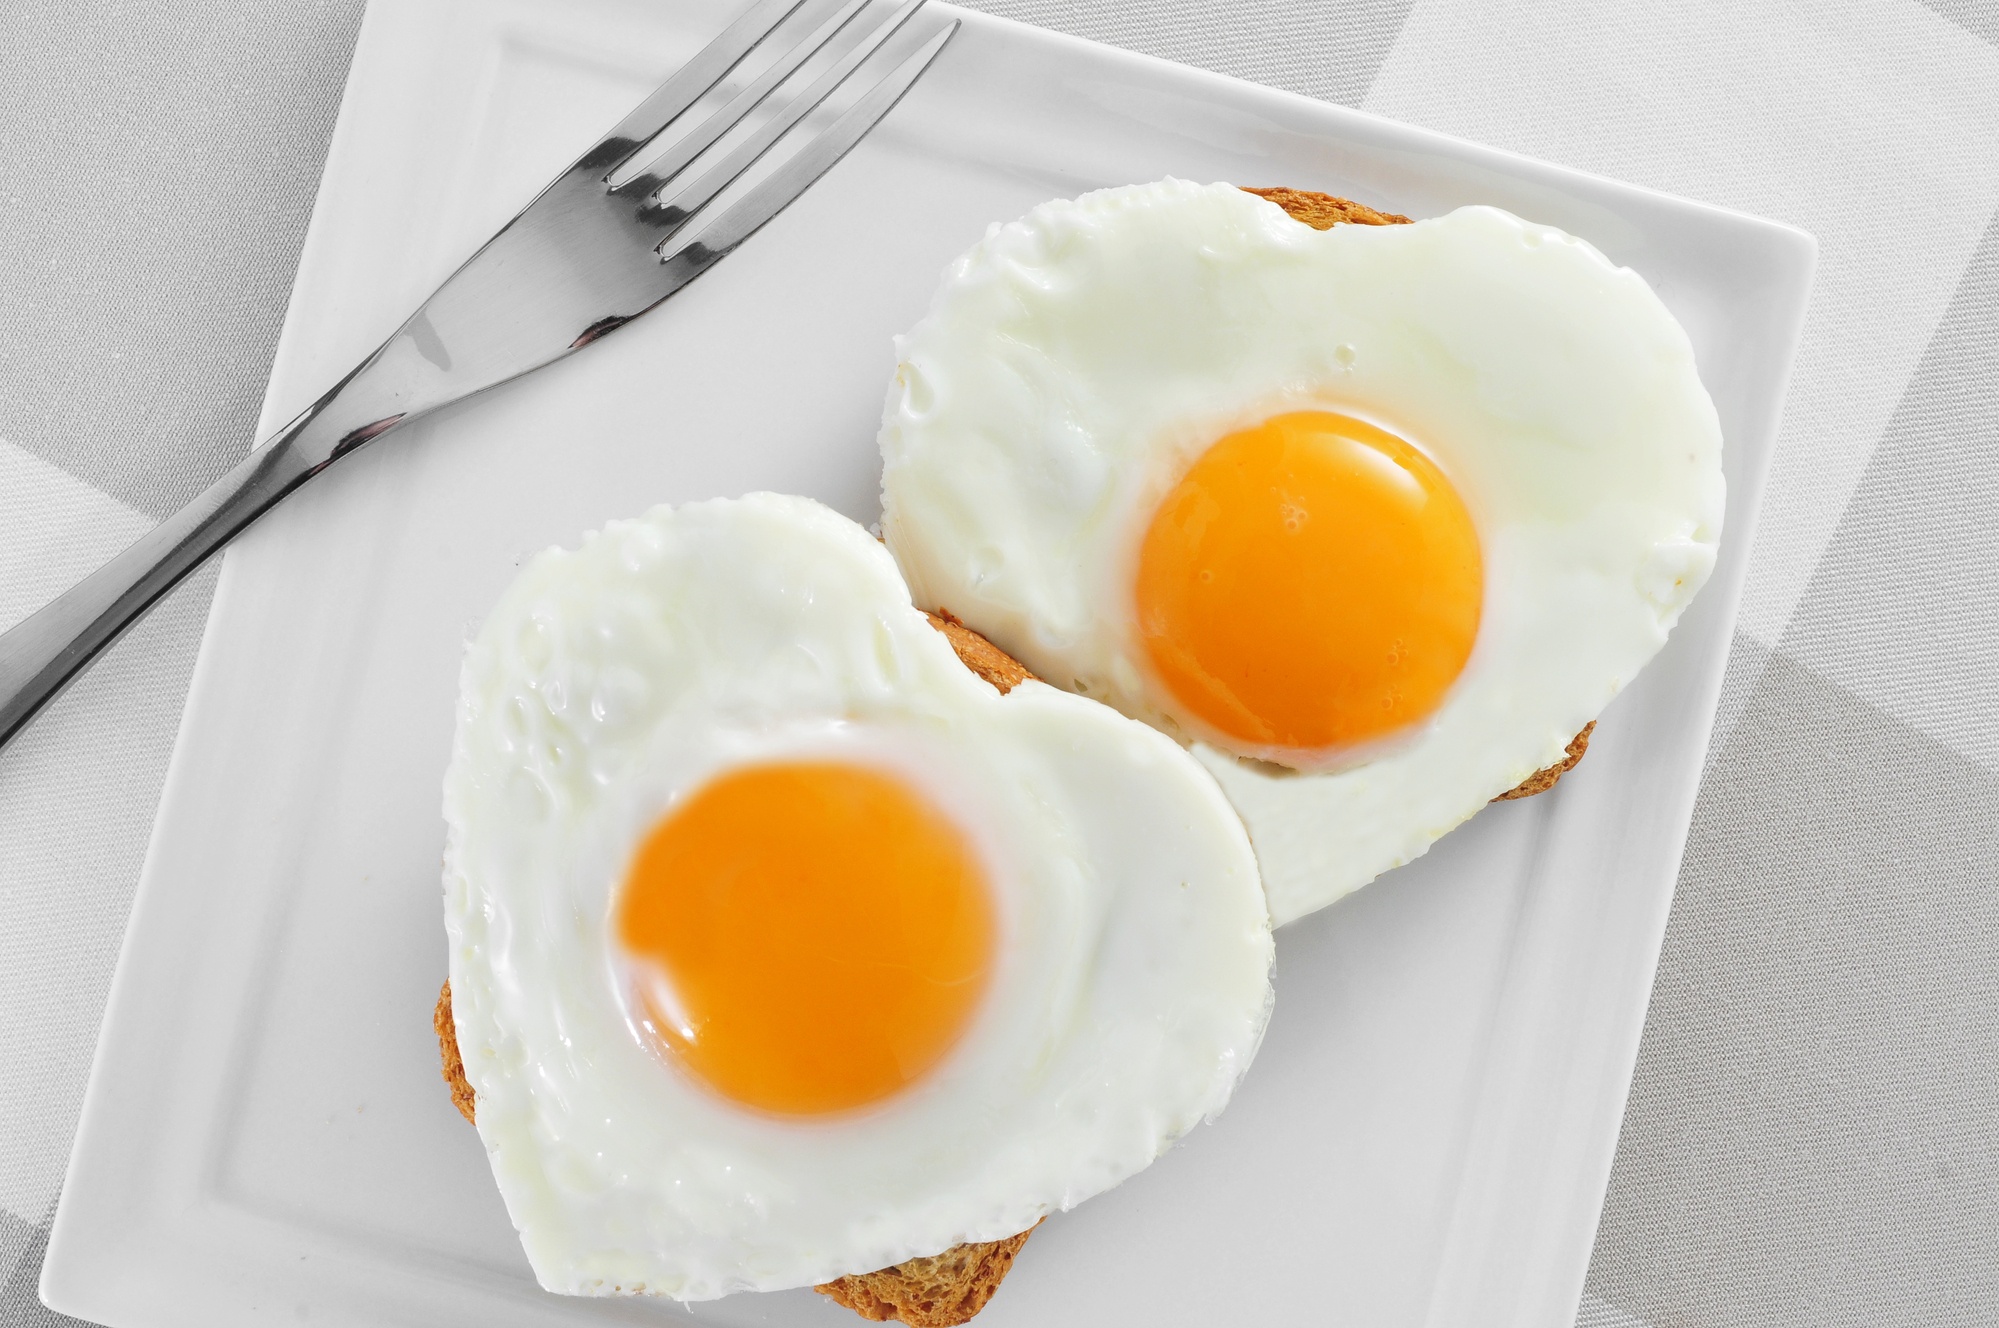 Eggs and Cholesterol